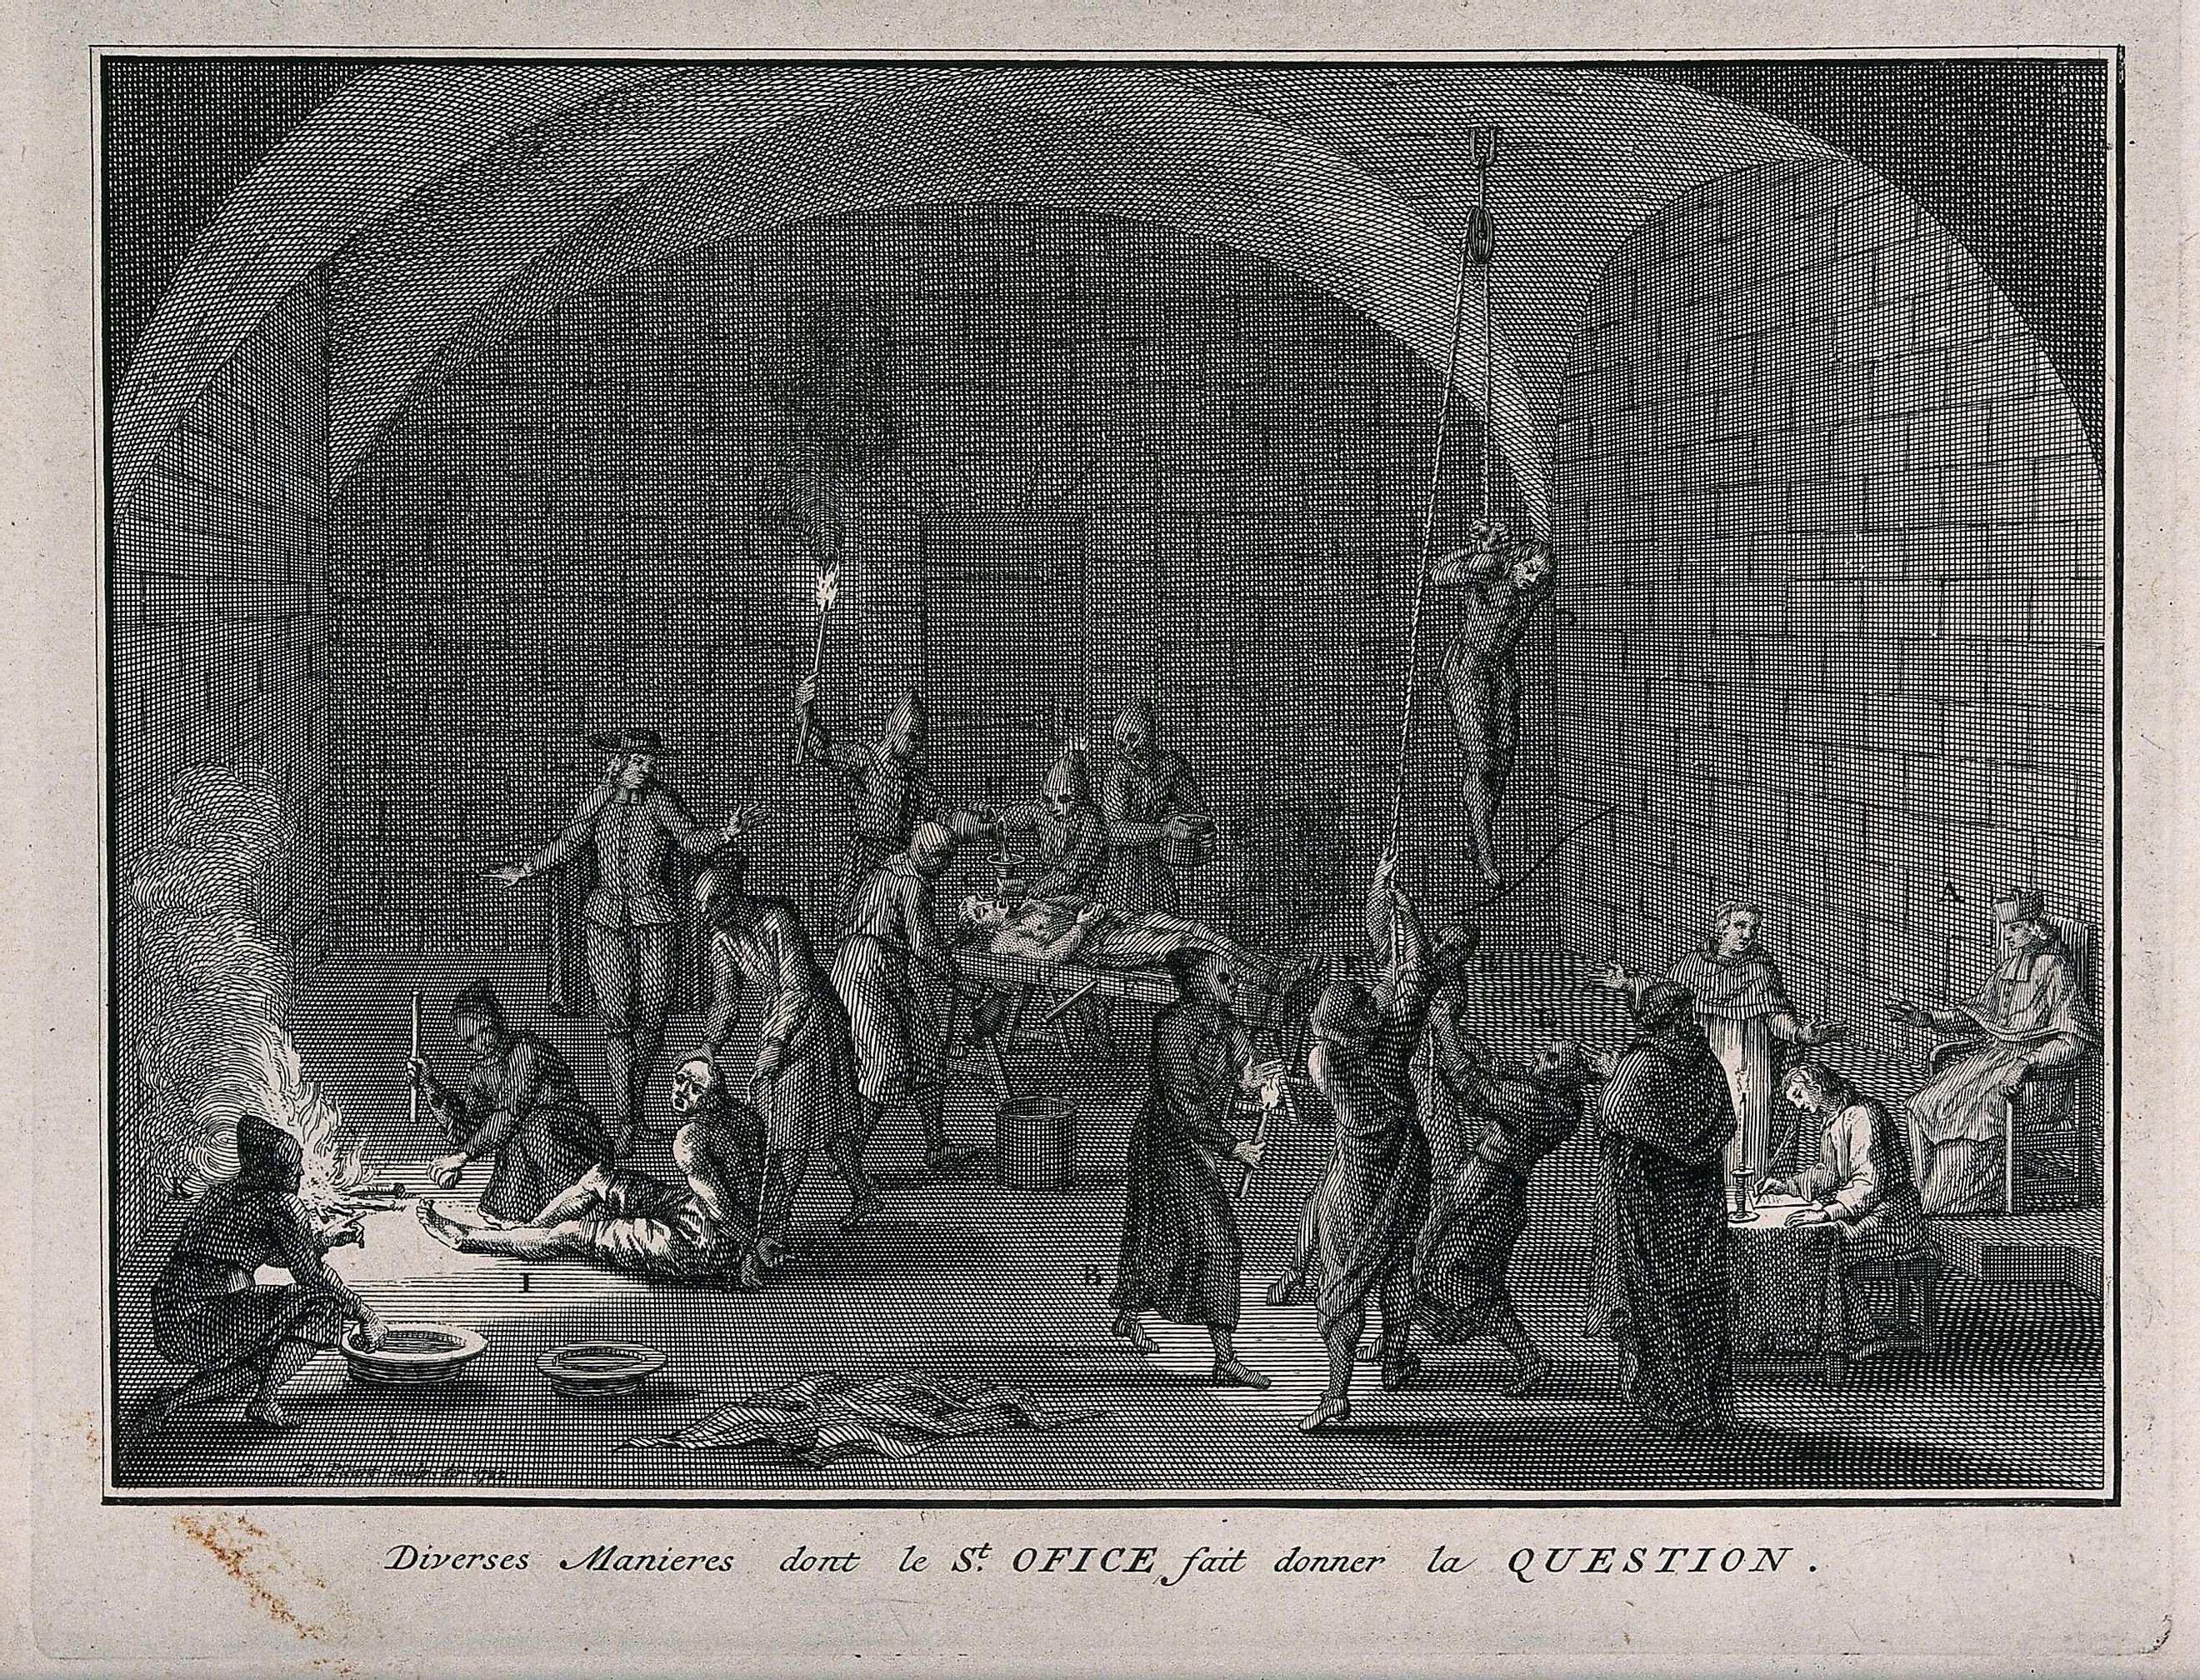 A torture chamber of the Spanish Inquisition